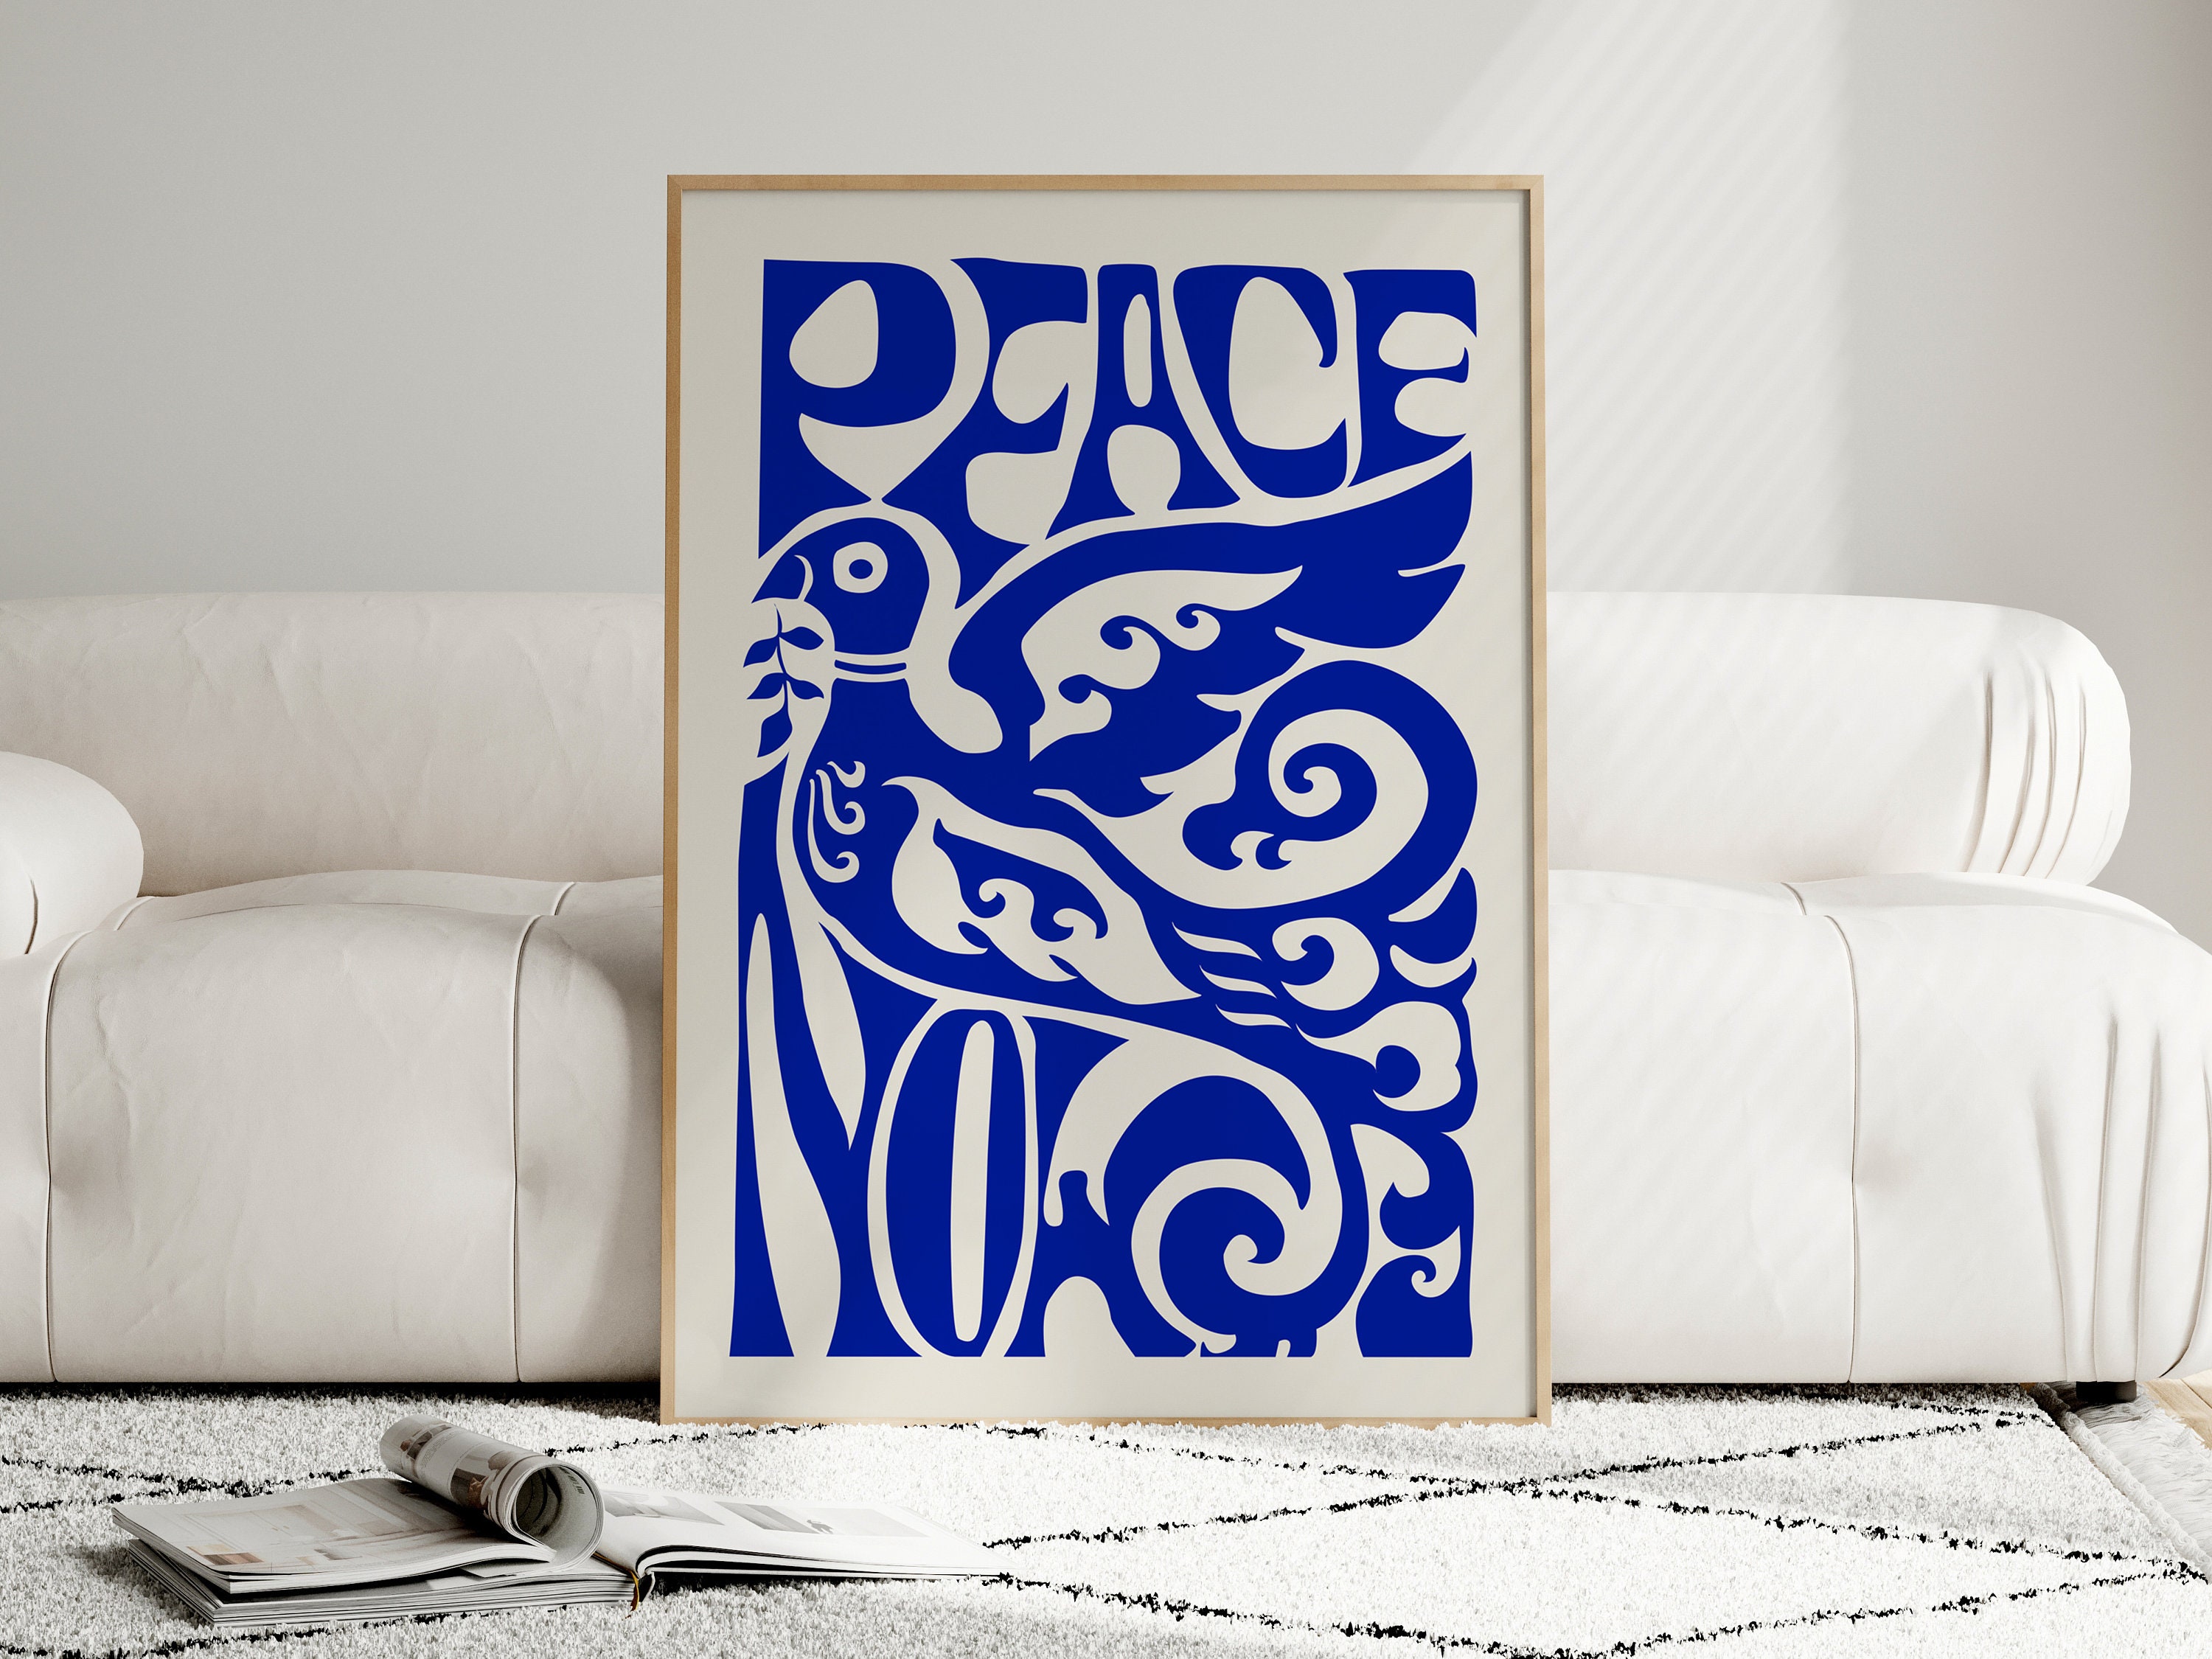 Peace now poster